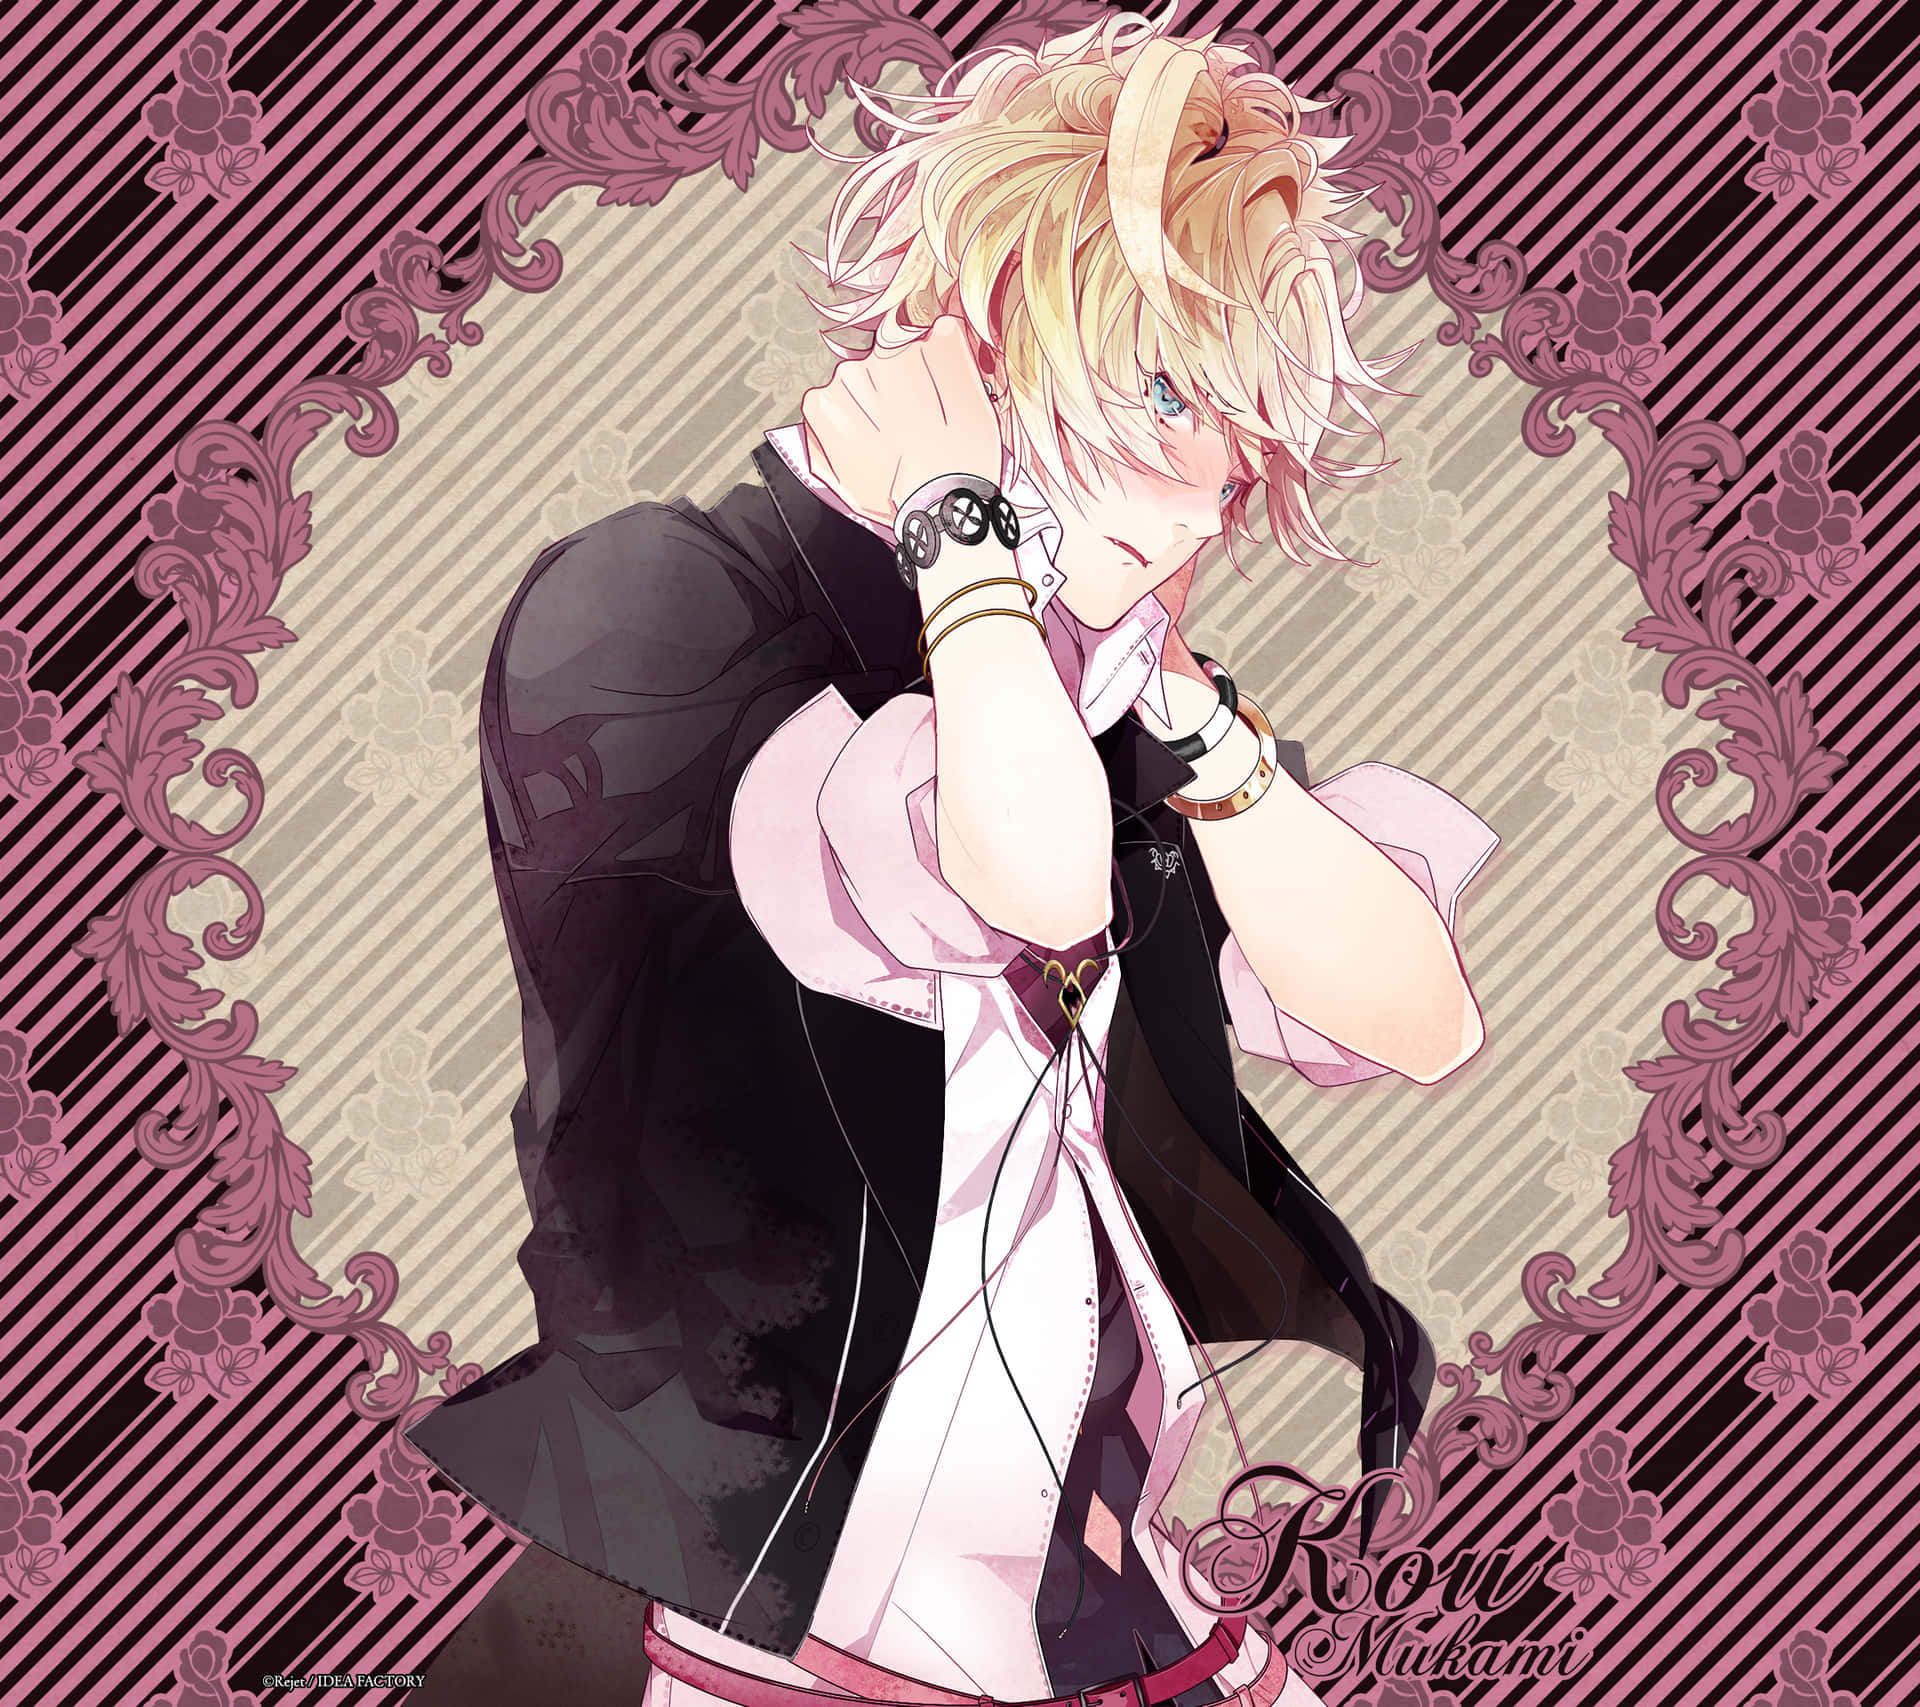 Diabolik Lovers - Board the Ghost Ship of Mystery and Romance!